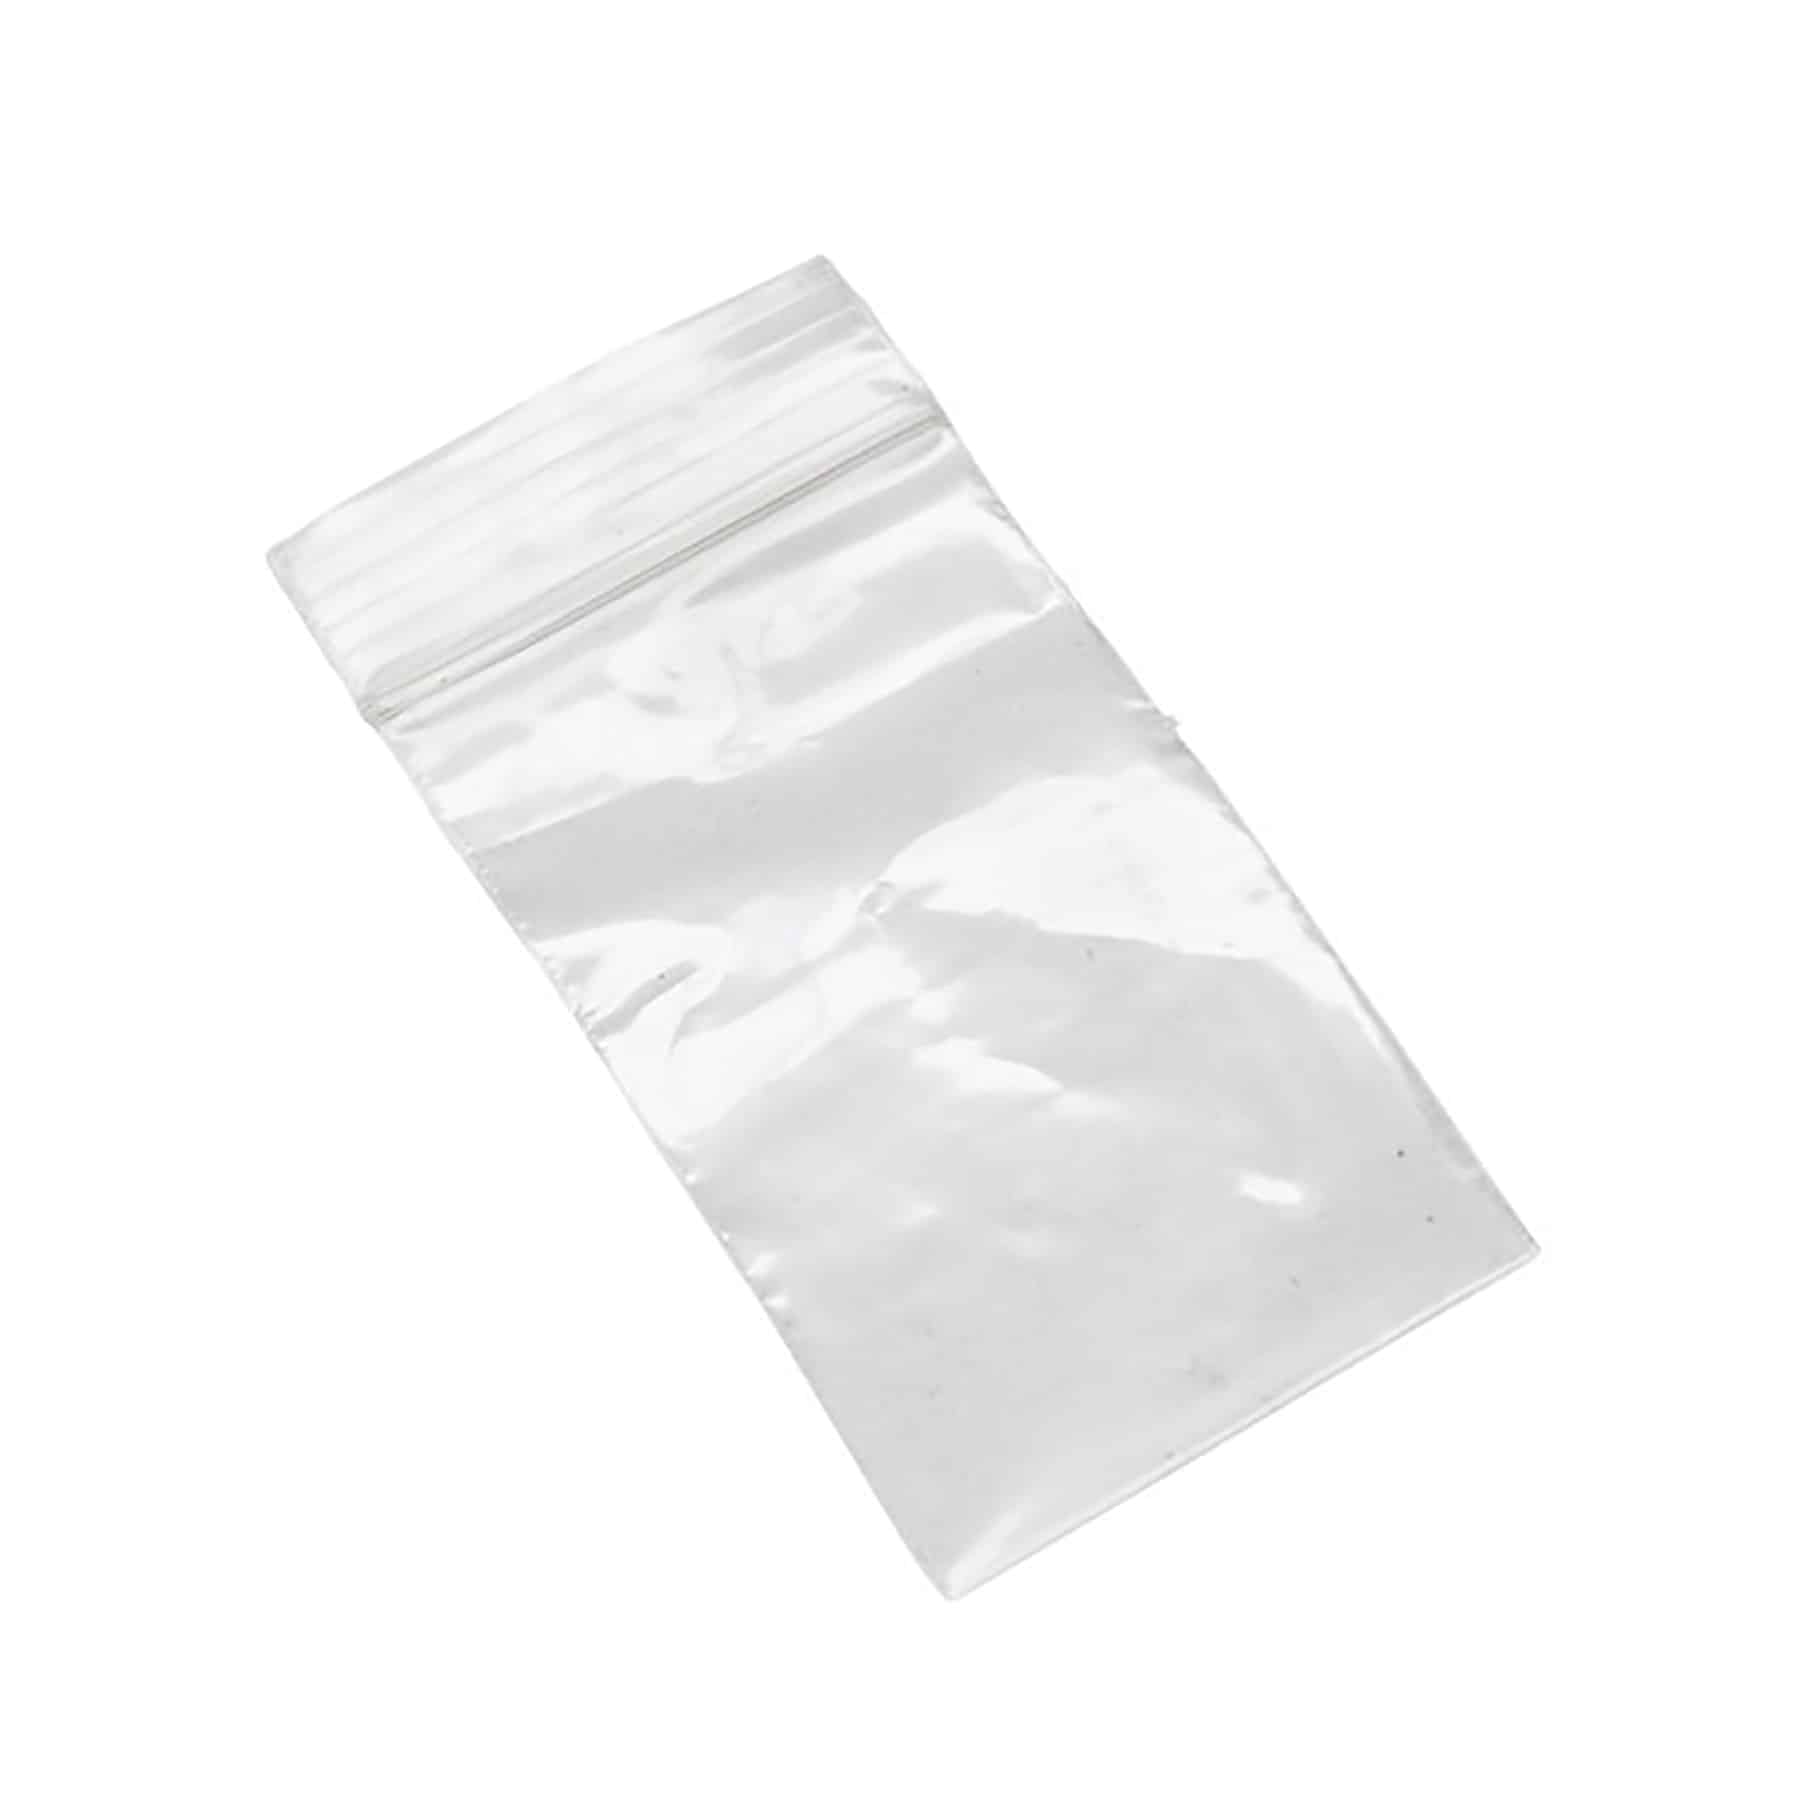 Heavy Duty Grip Seal Re-Sealable Clear Polythene Bags 